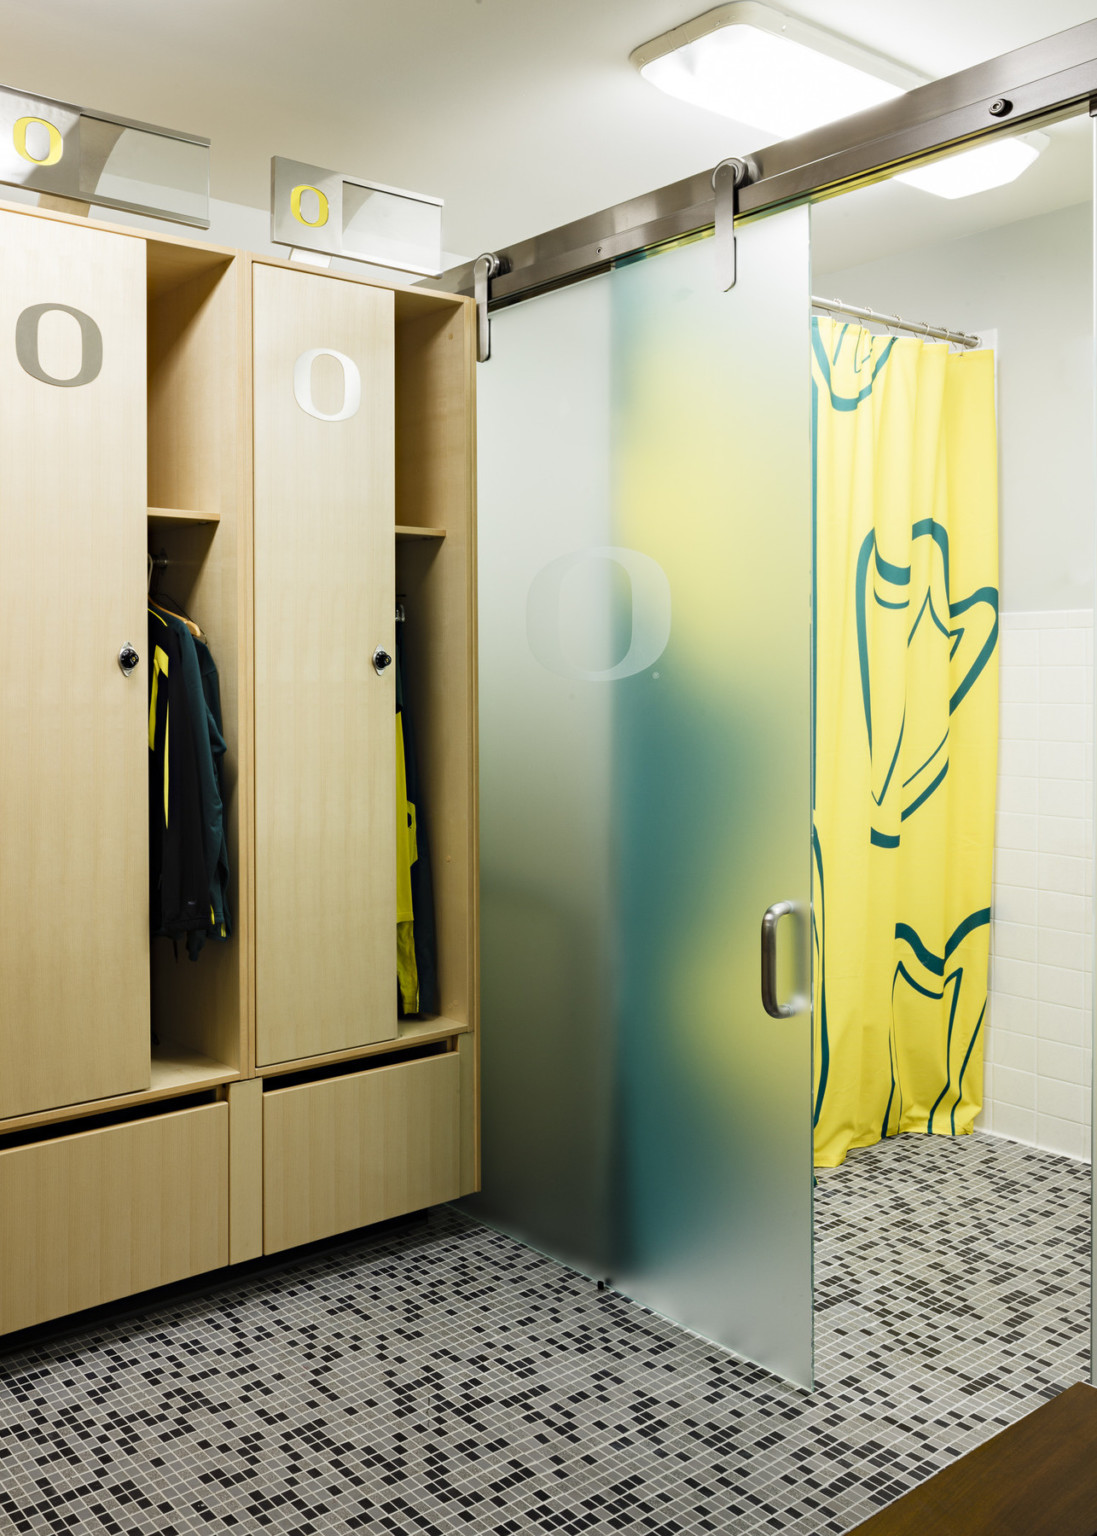 Lockers on tiled floor. Right, partially open foggy sliding glass door to shower with green and yellow curtain, white wall tile